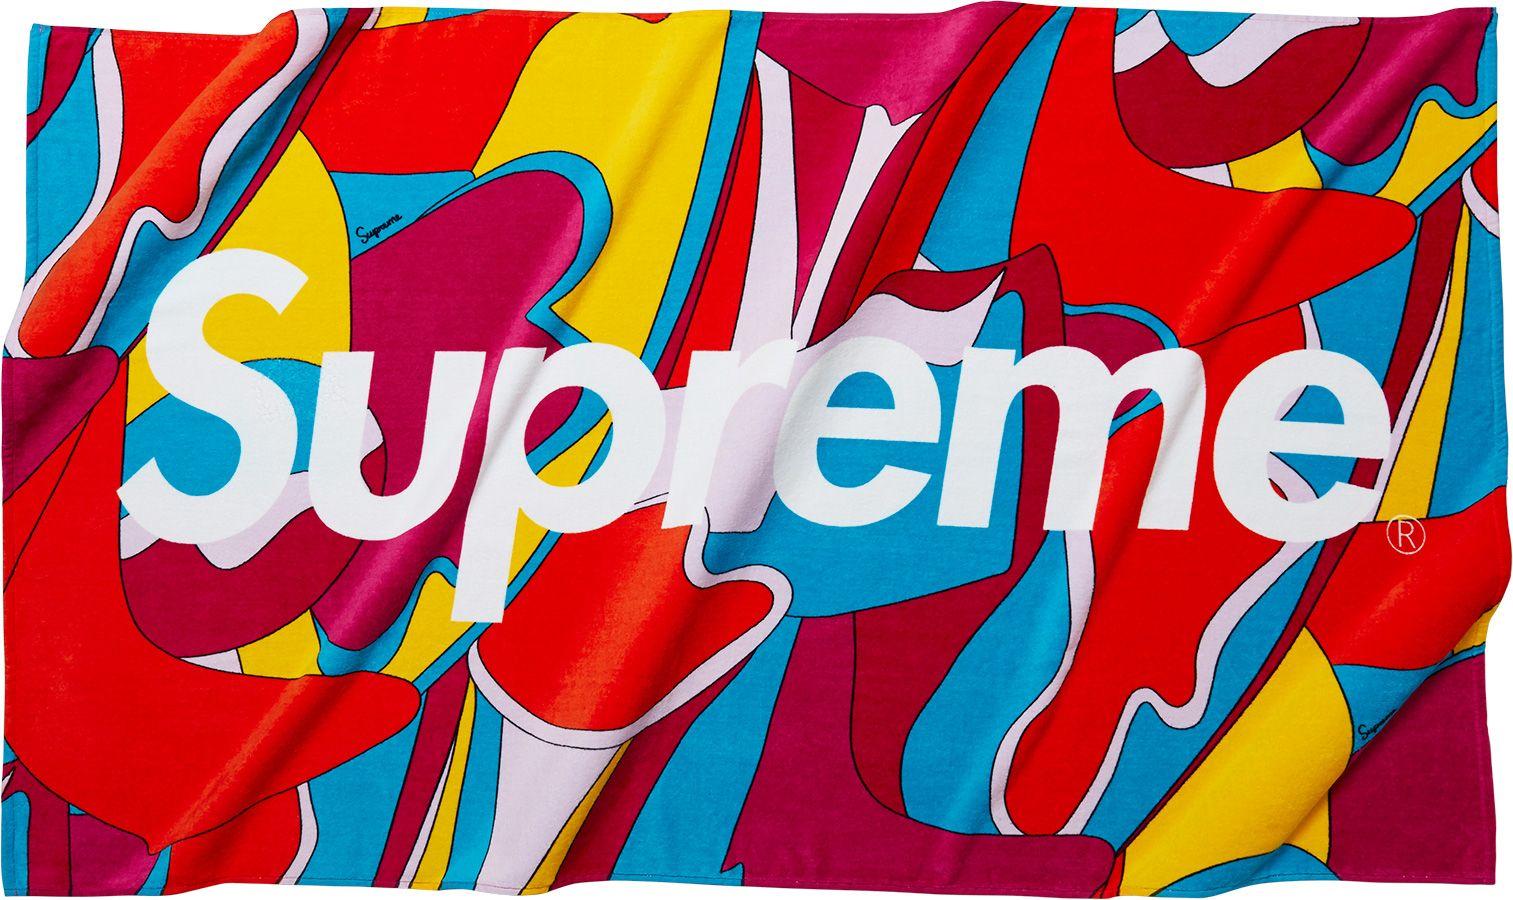 Supreme Beach Logo - The Collectibles That Prove Supreme Is Much More Than Clothes - Racked